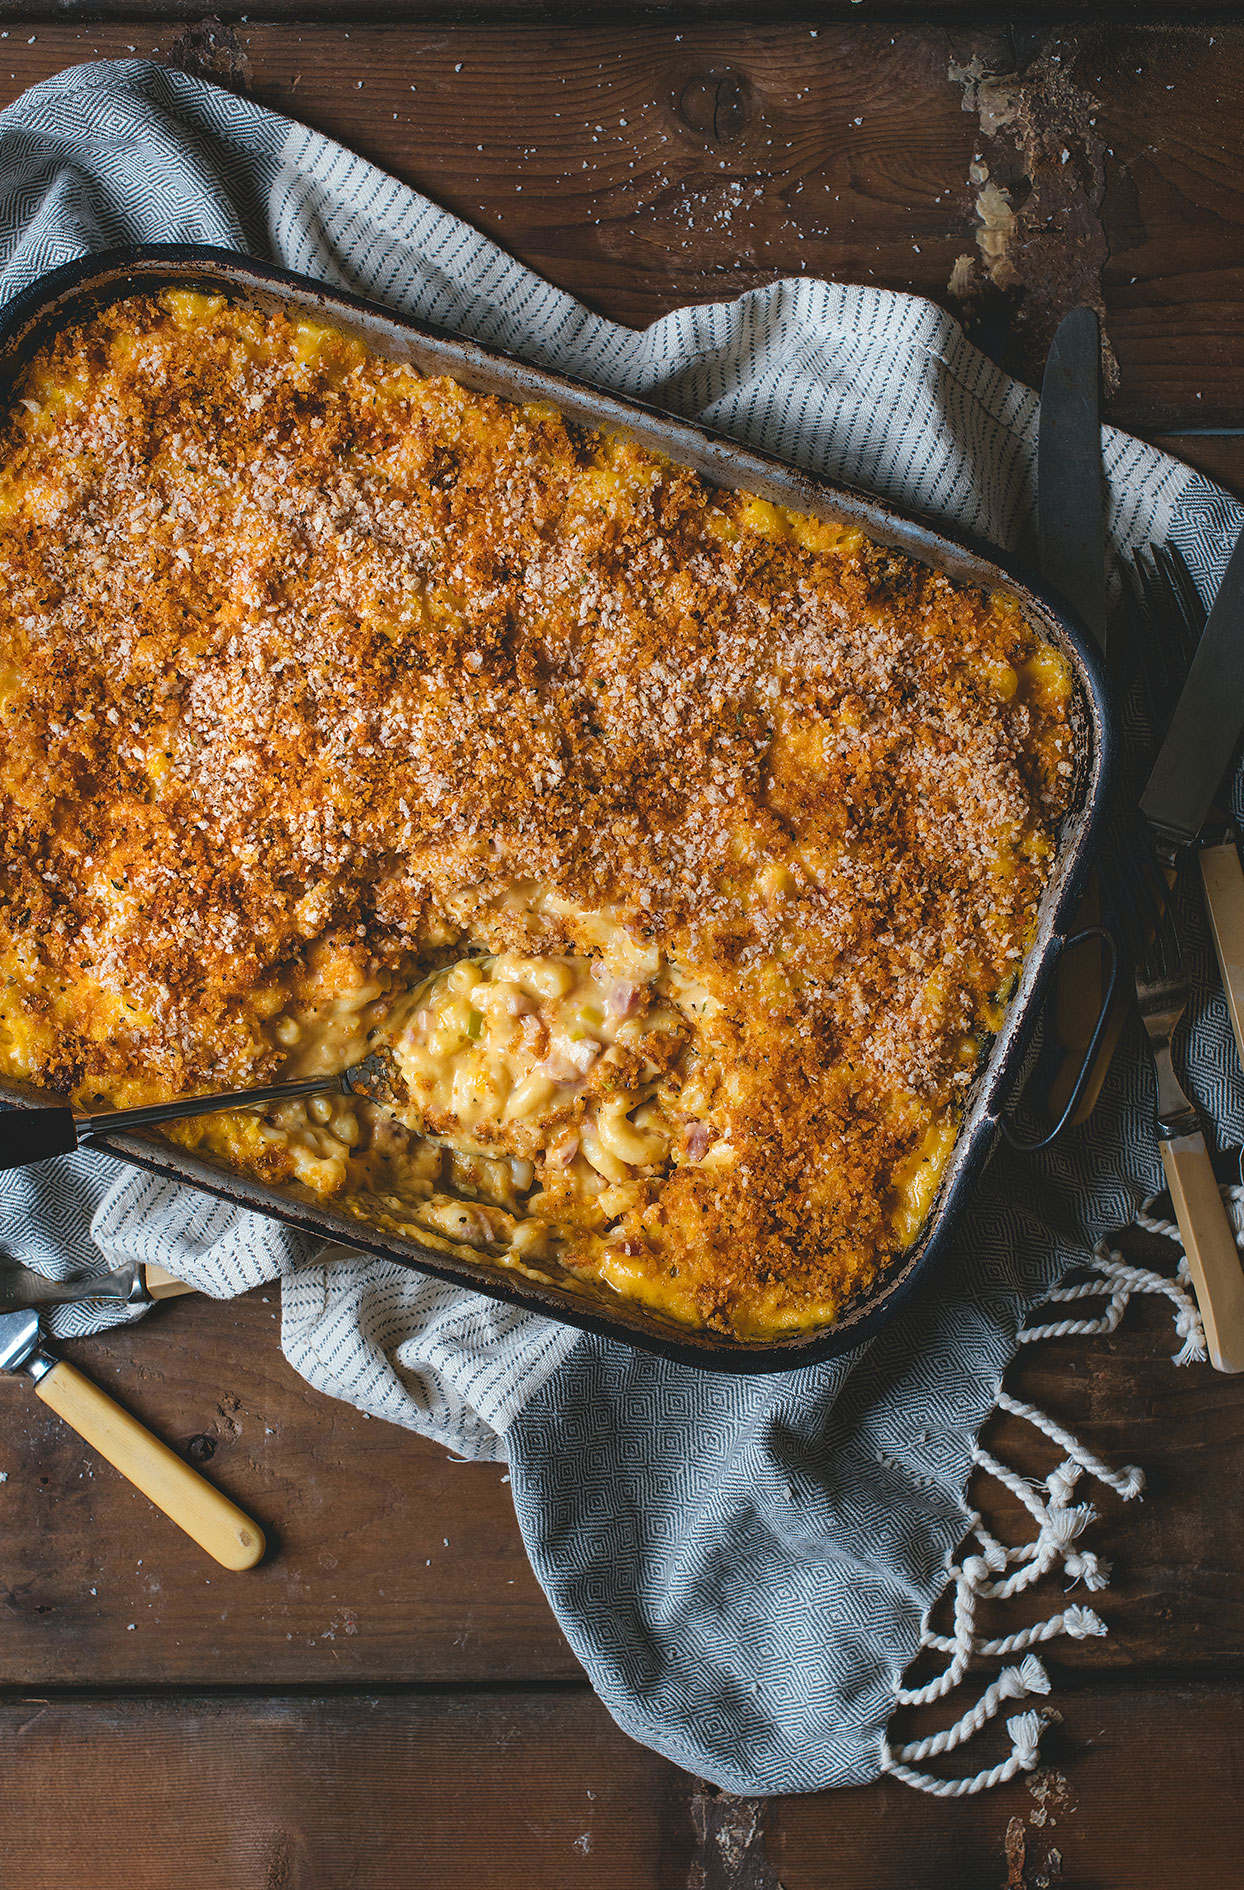 Macaroni and cheese with ham and carrot purée